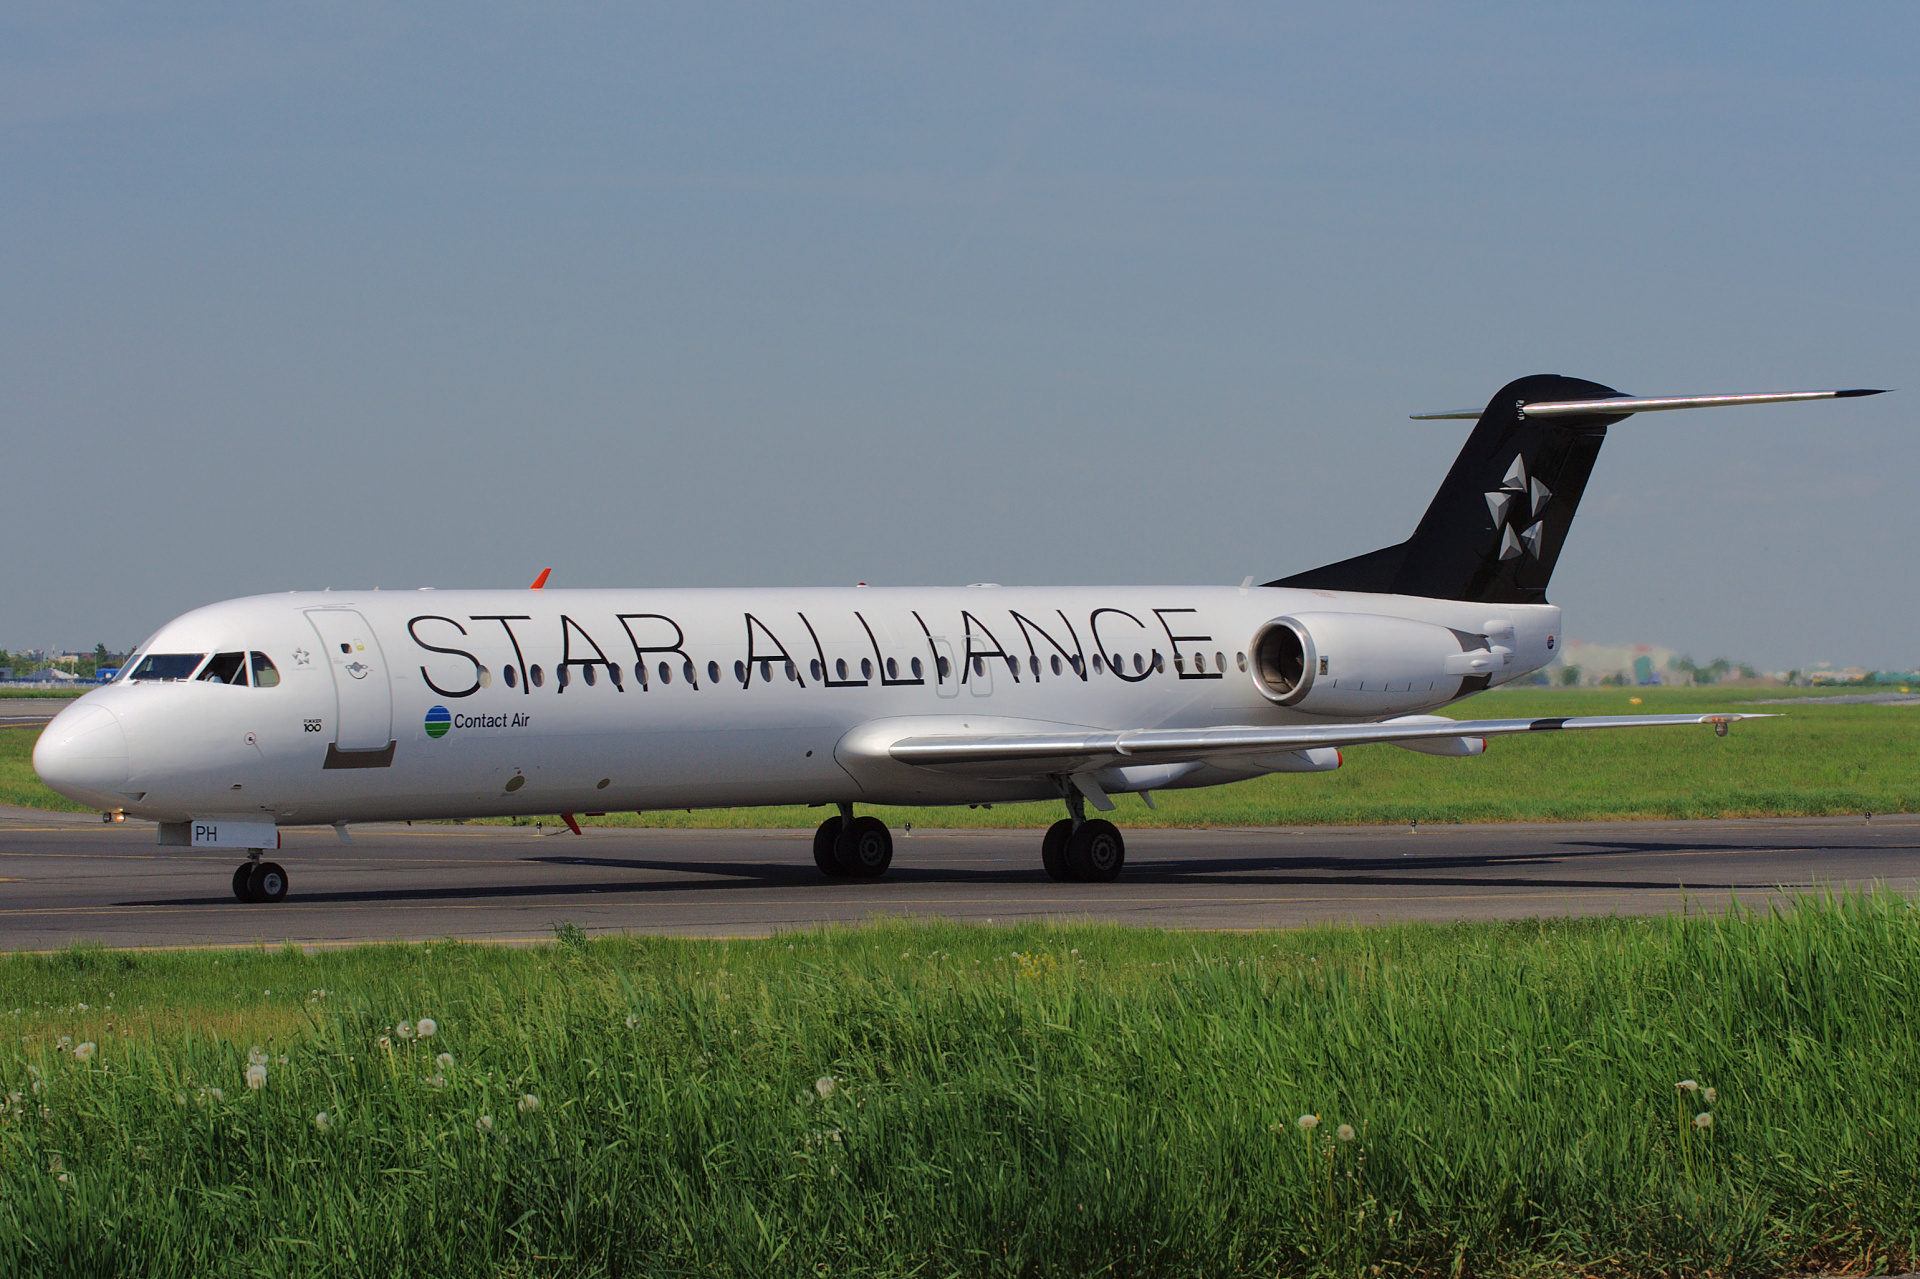 D-AGPH (Star Alliance livery) (Aircraft » EPWA Spotting » Fokker 100 » Contact Air)